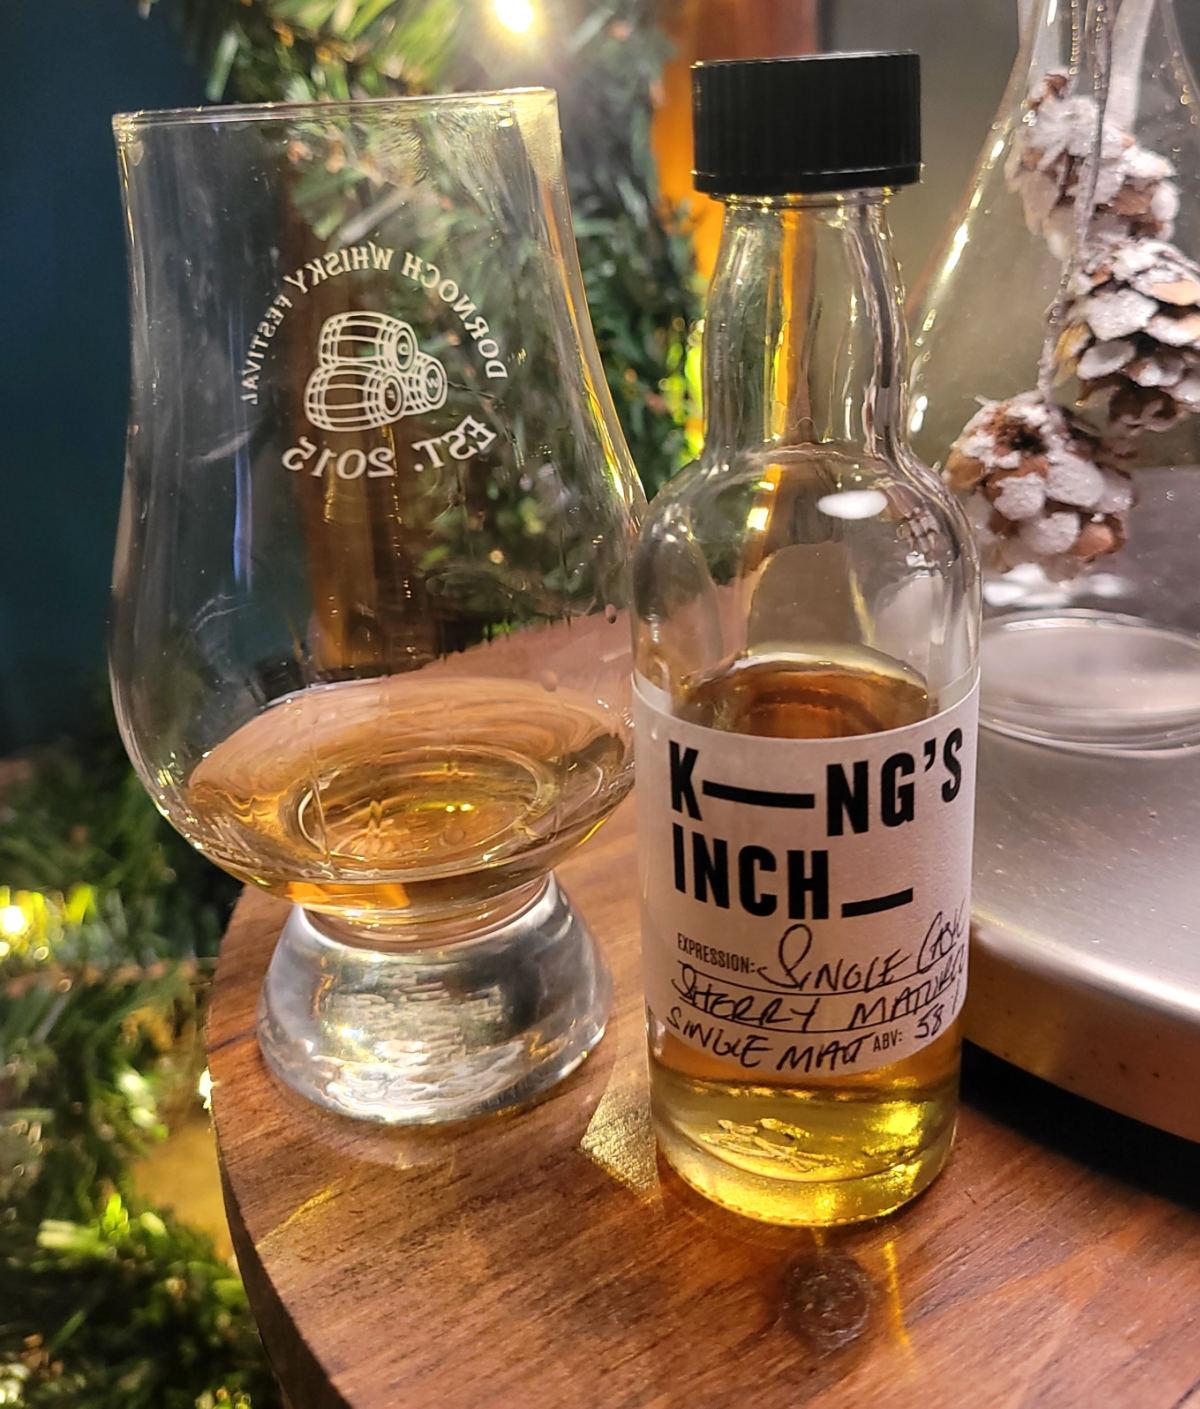 Kings-Inch-Sherry-Cask-tasting-at-home-